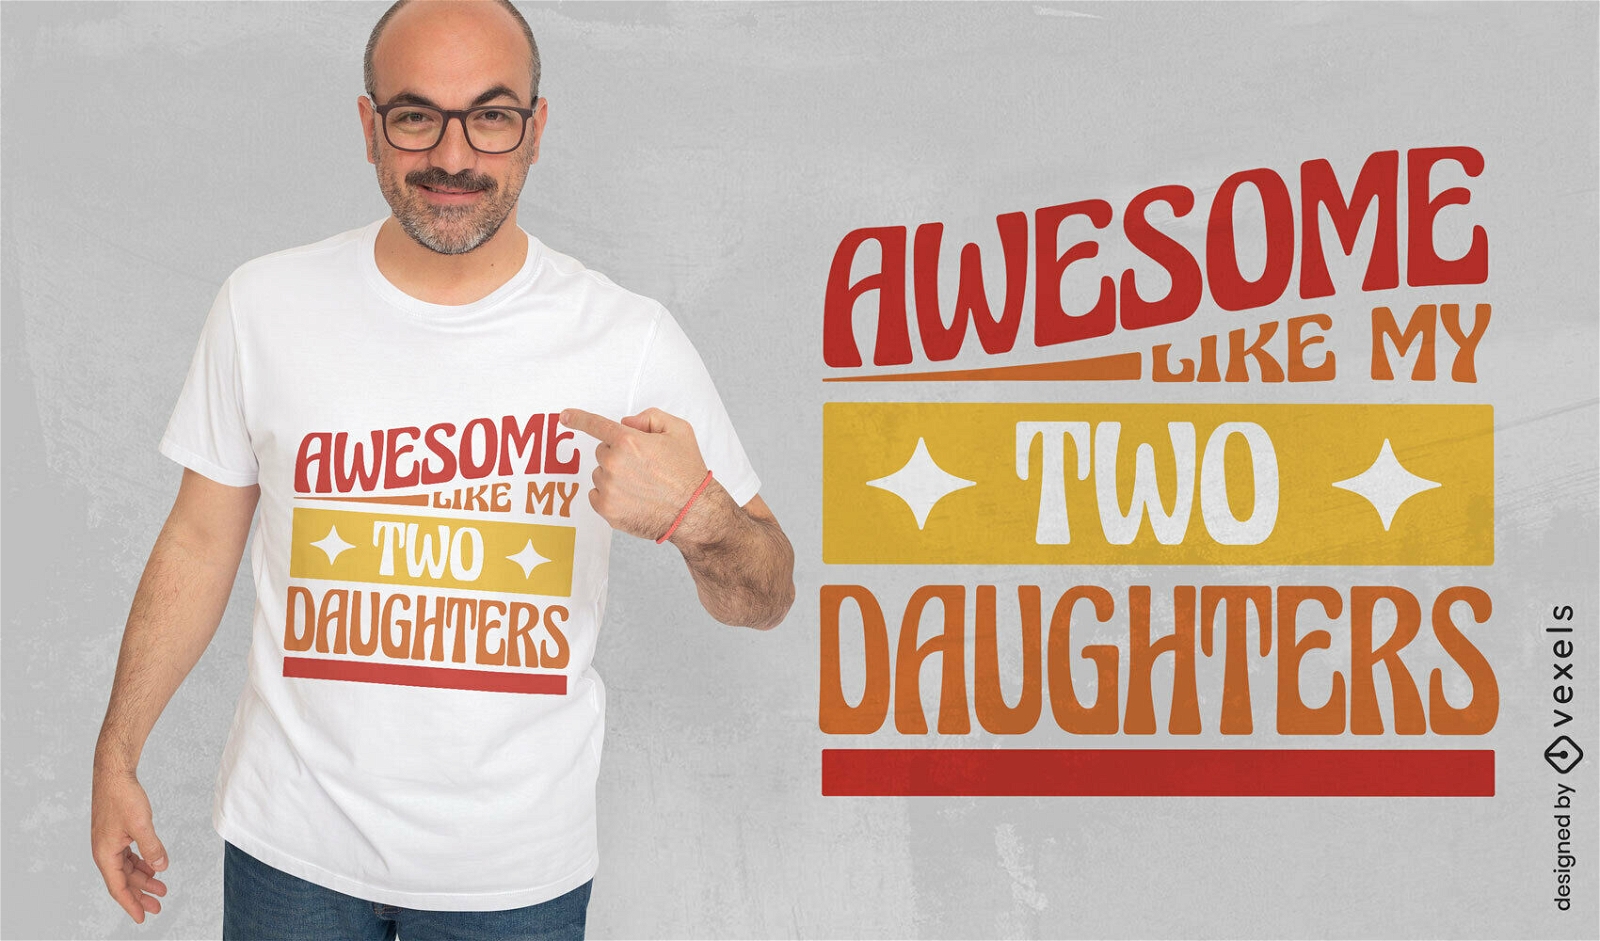 Dad awesome daugthers quote t-shirt design